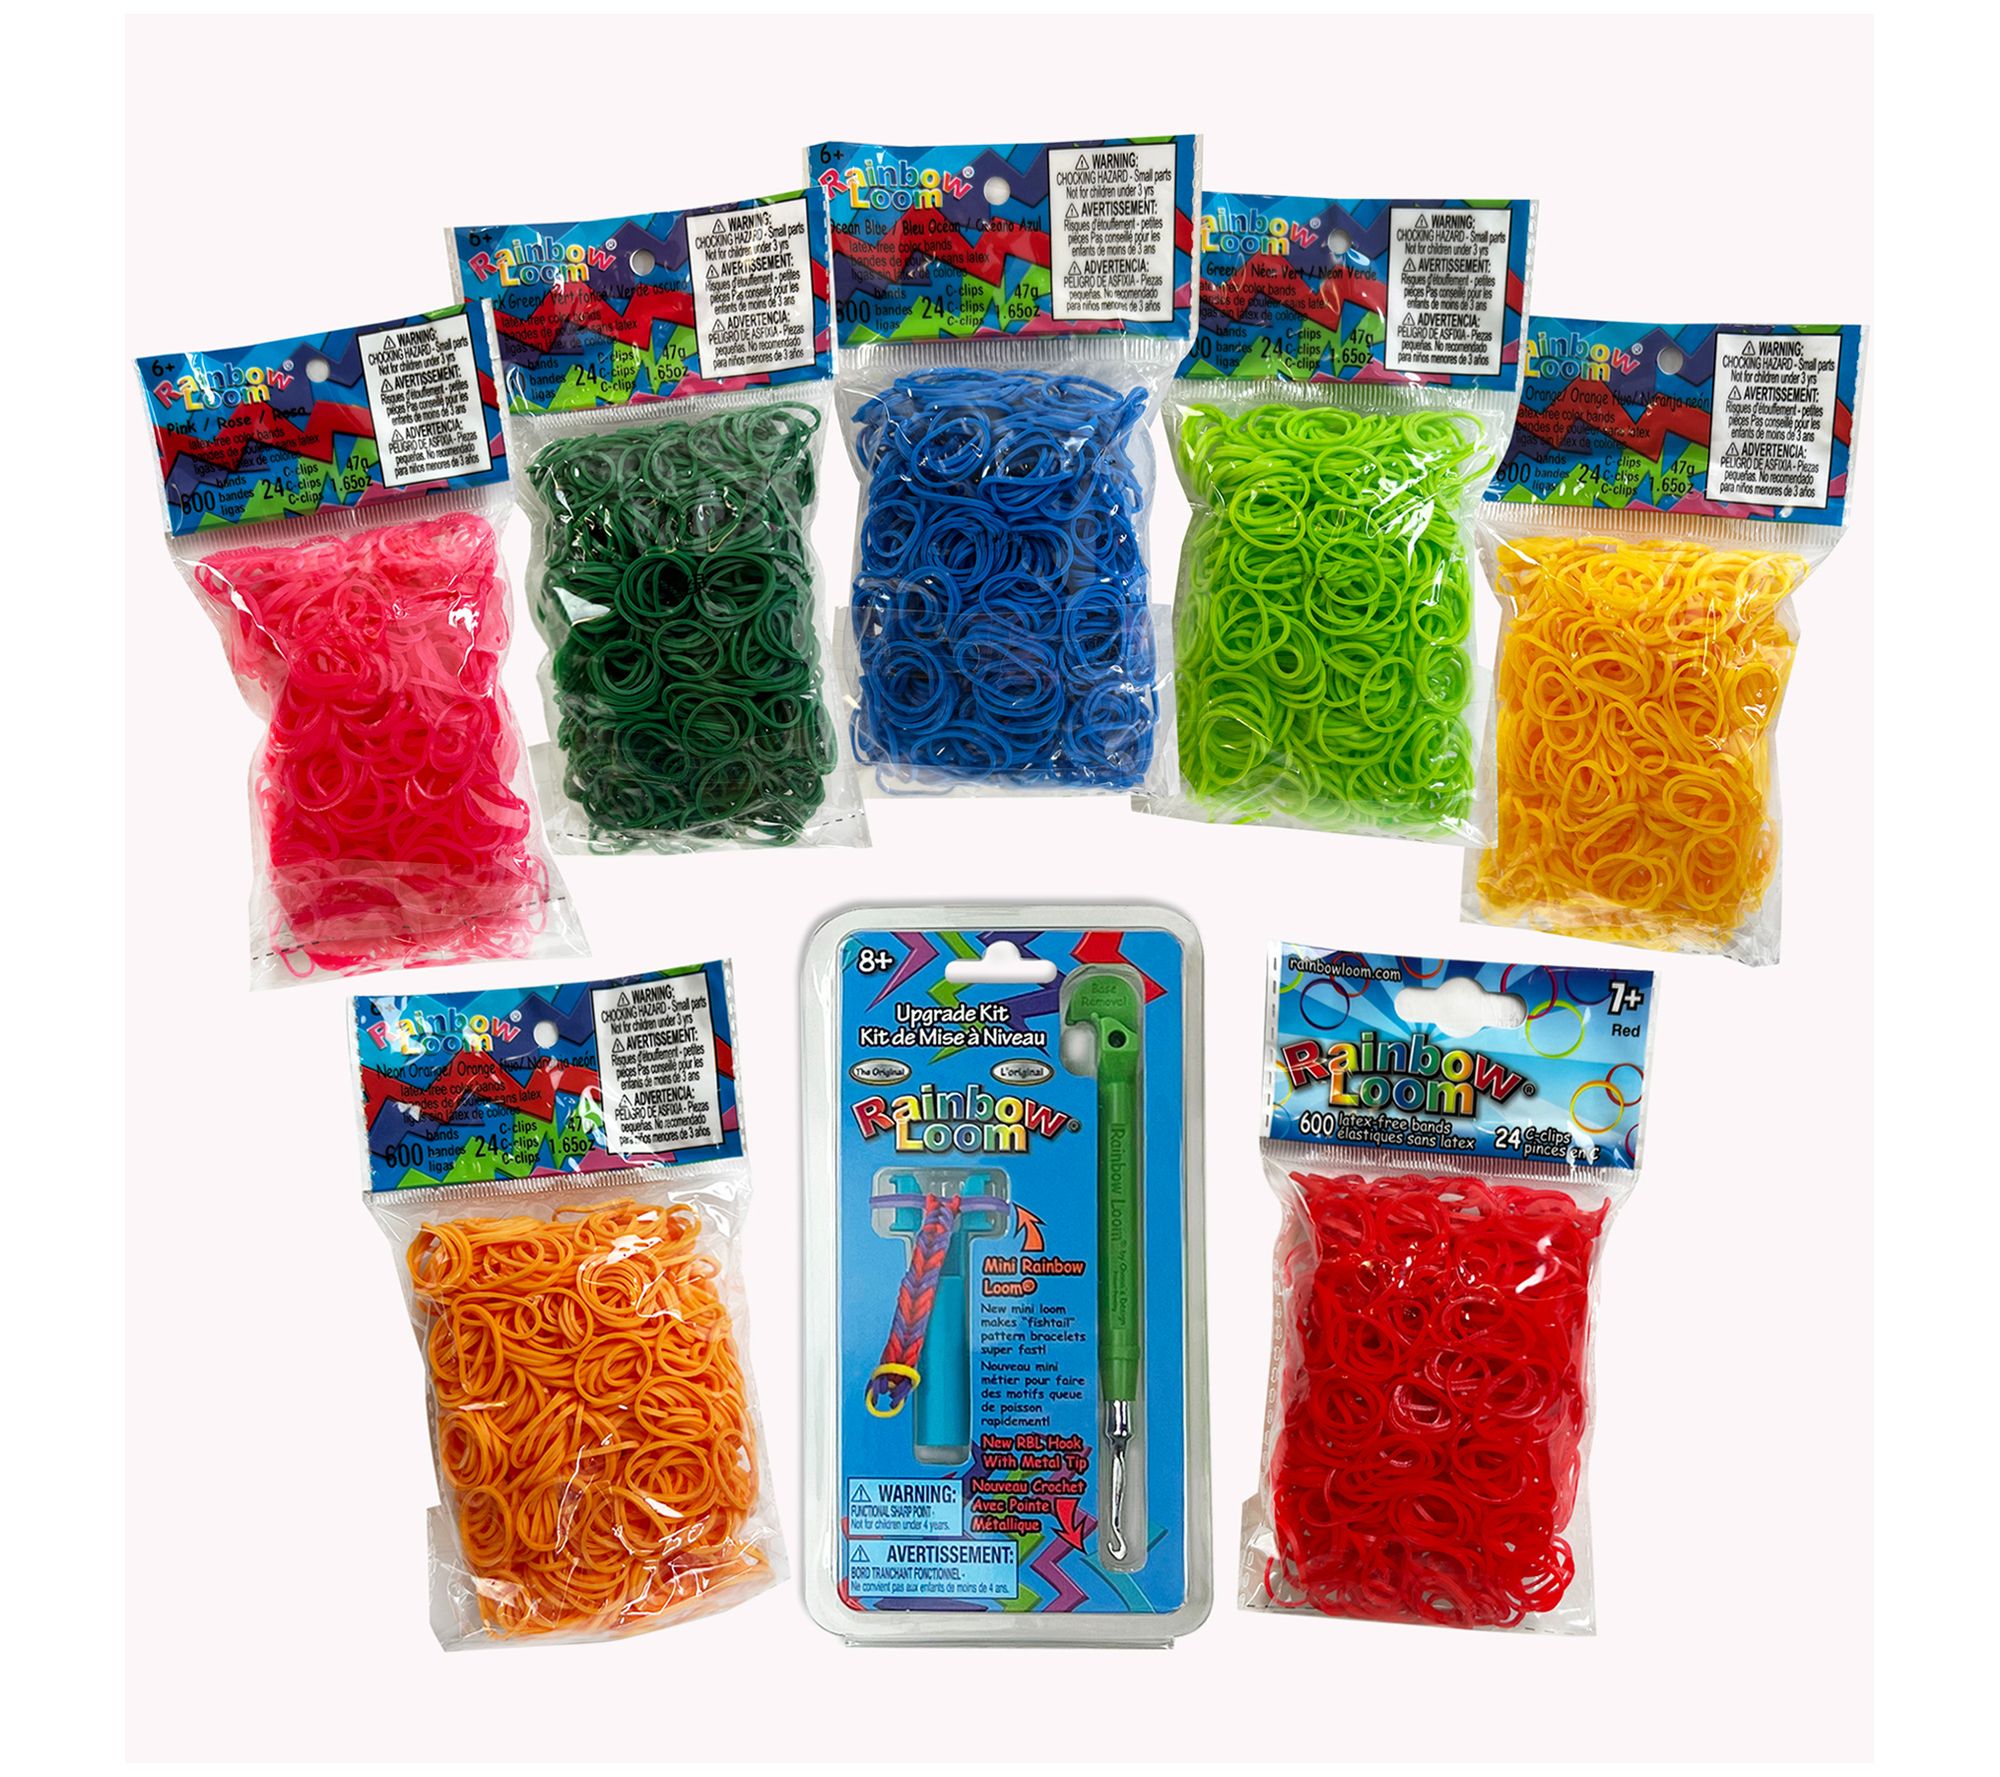 NEW Authentic Rainbow Loom Rubber Bands - 600 Bands & 24 C-Clips